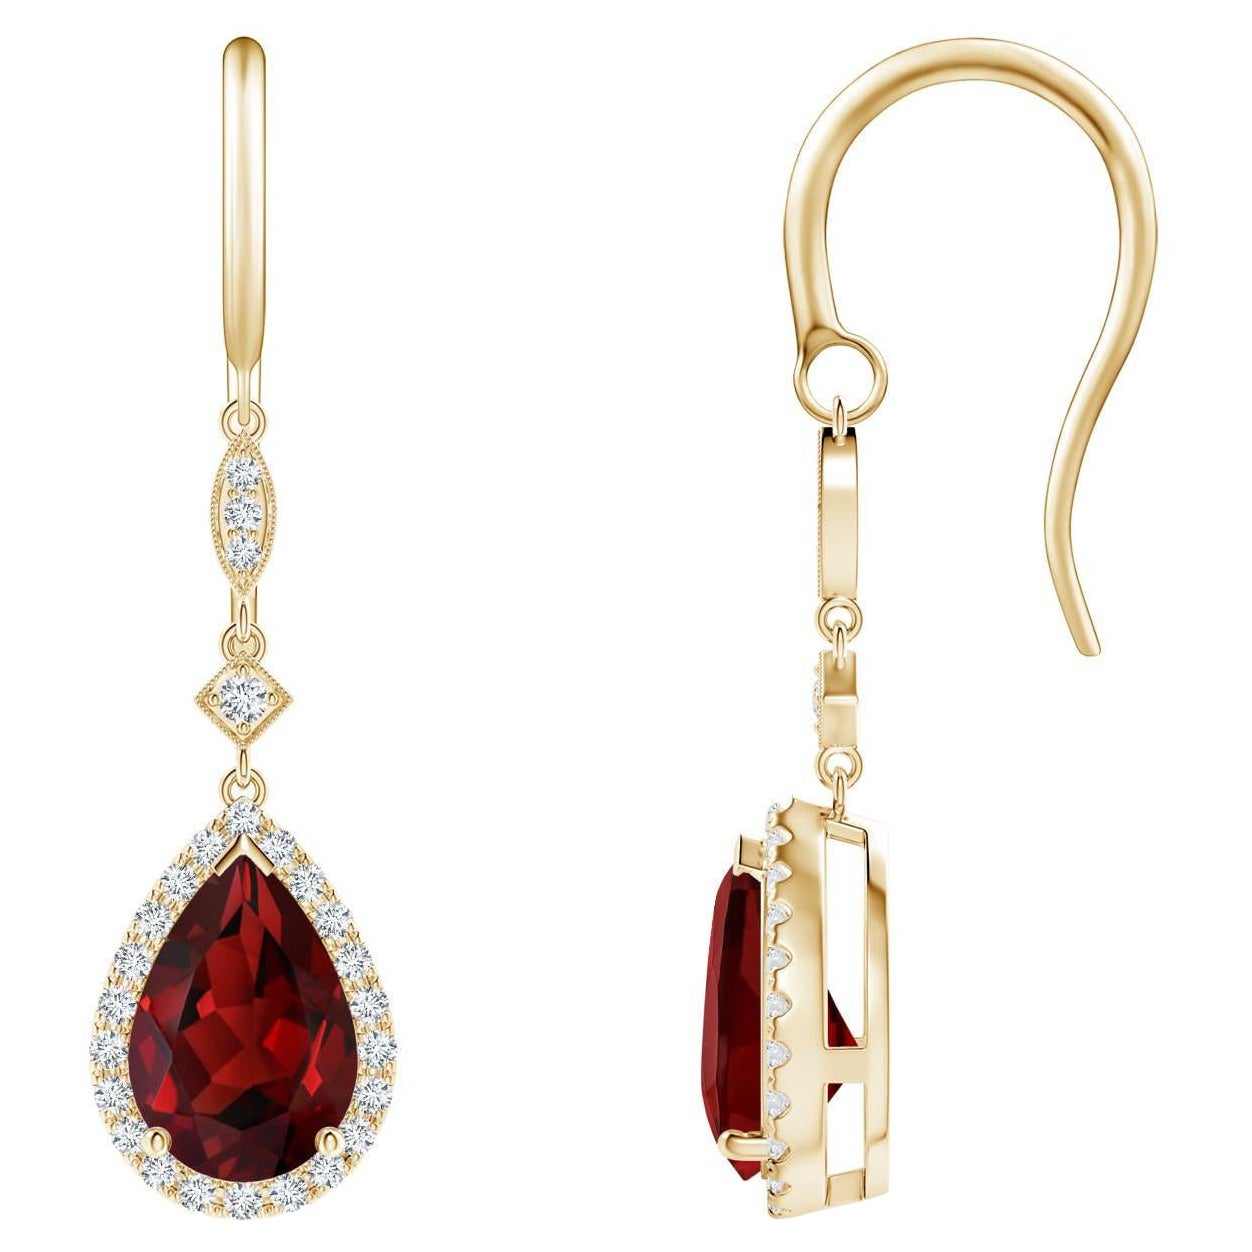 Natural Pear-Shaped 3ct Garnet Drop Earrings with Diamond in 14K Yellow Gold